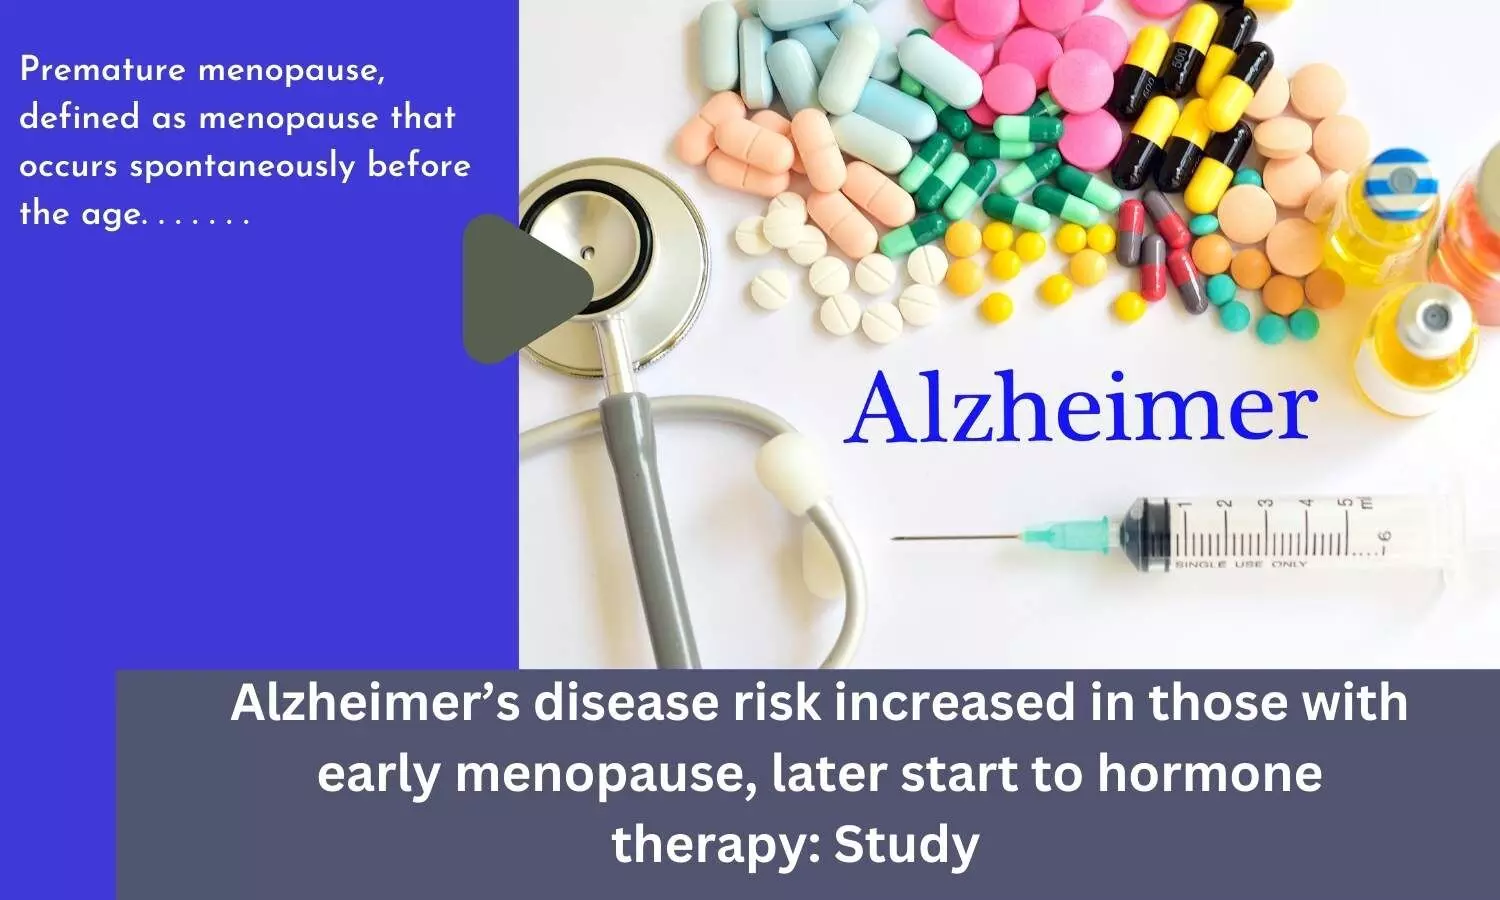 Alzheimers disease risk increased in those with early menopause, later start to hormone therapy: Study